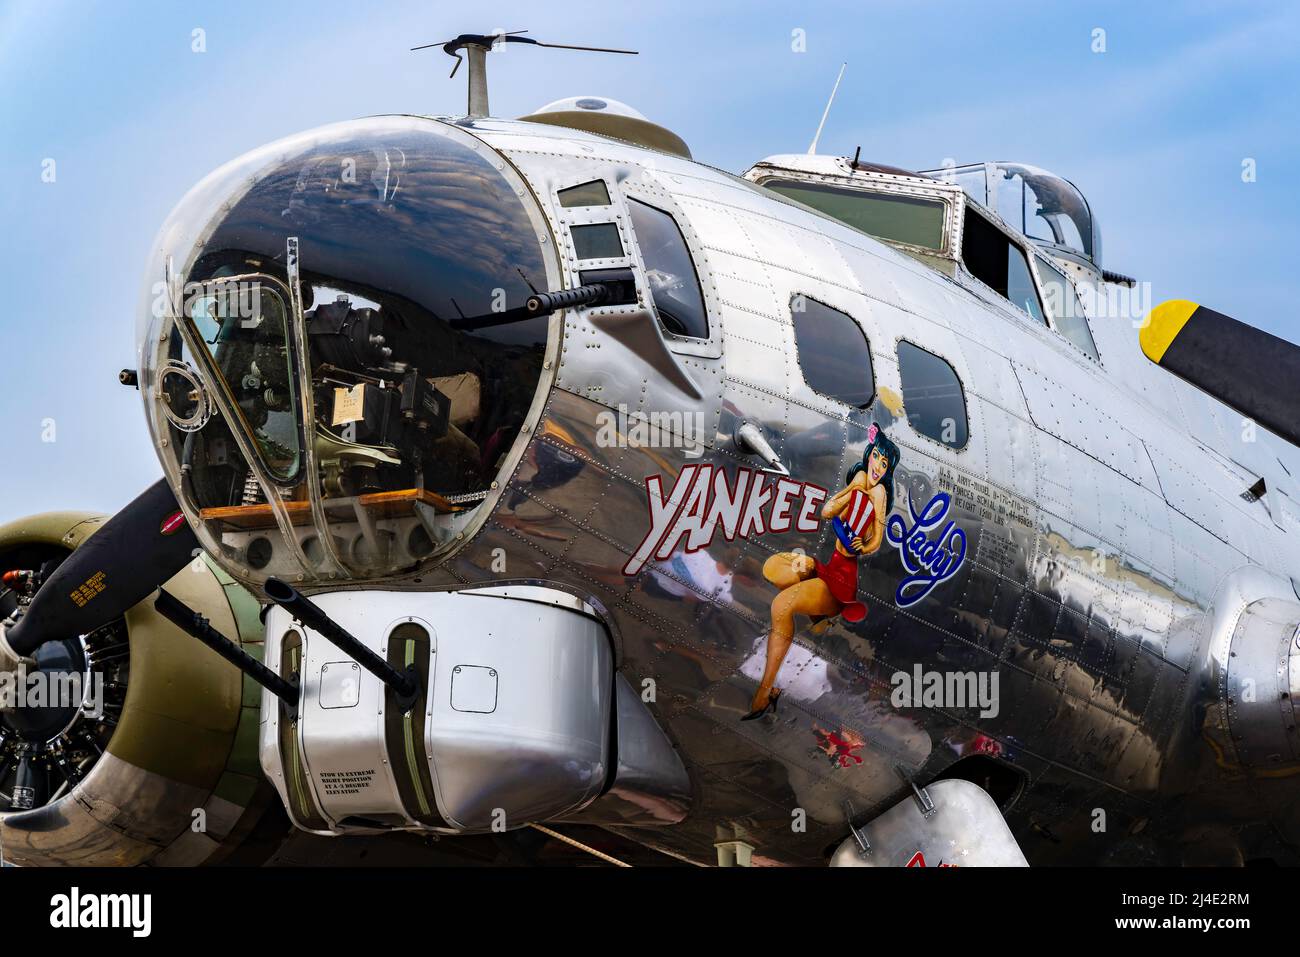 B17 Flying Fortress bomber Yankee Lady at Thunder Over Michigan airshow. Stock Photo